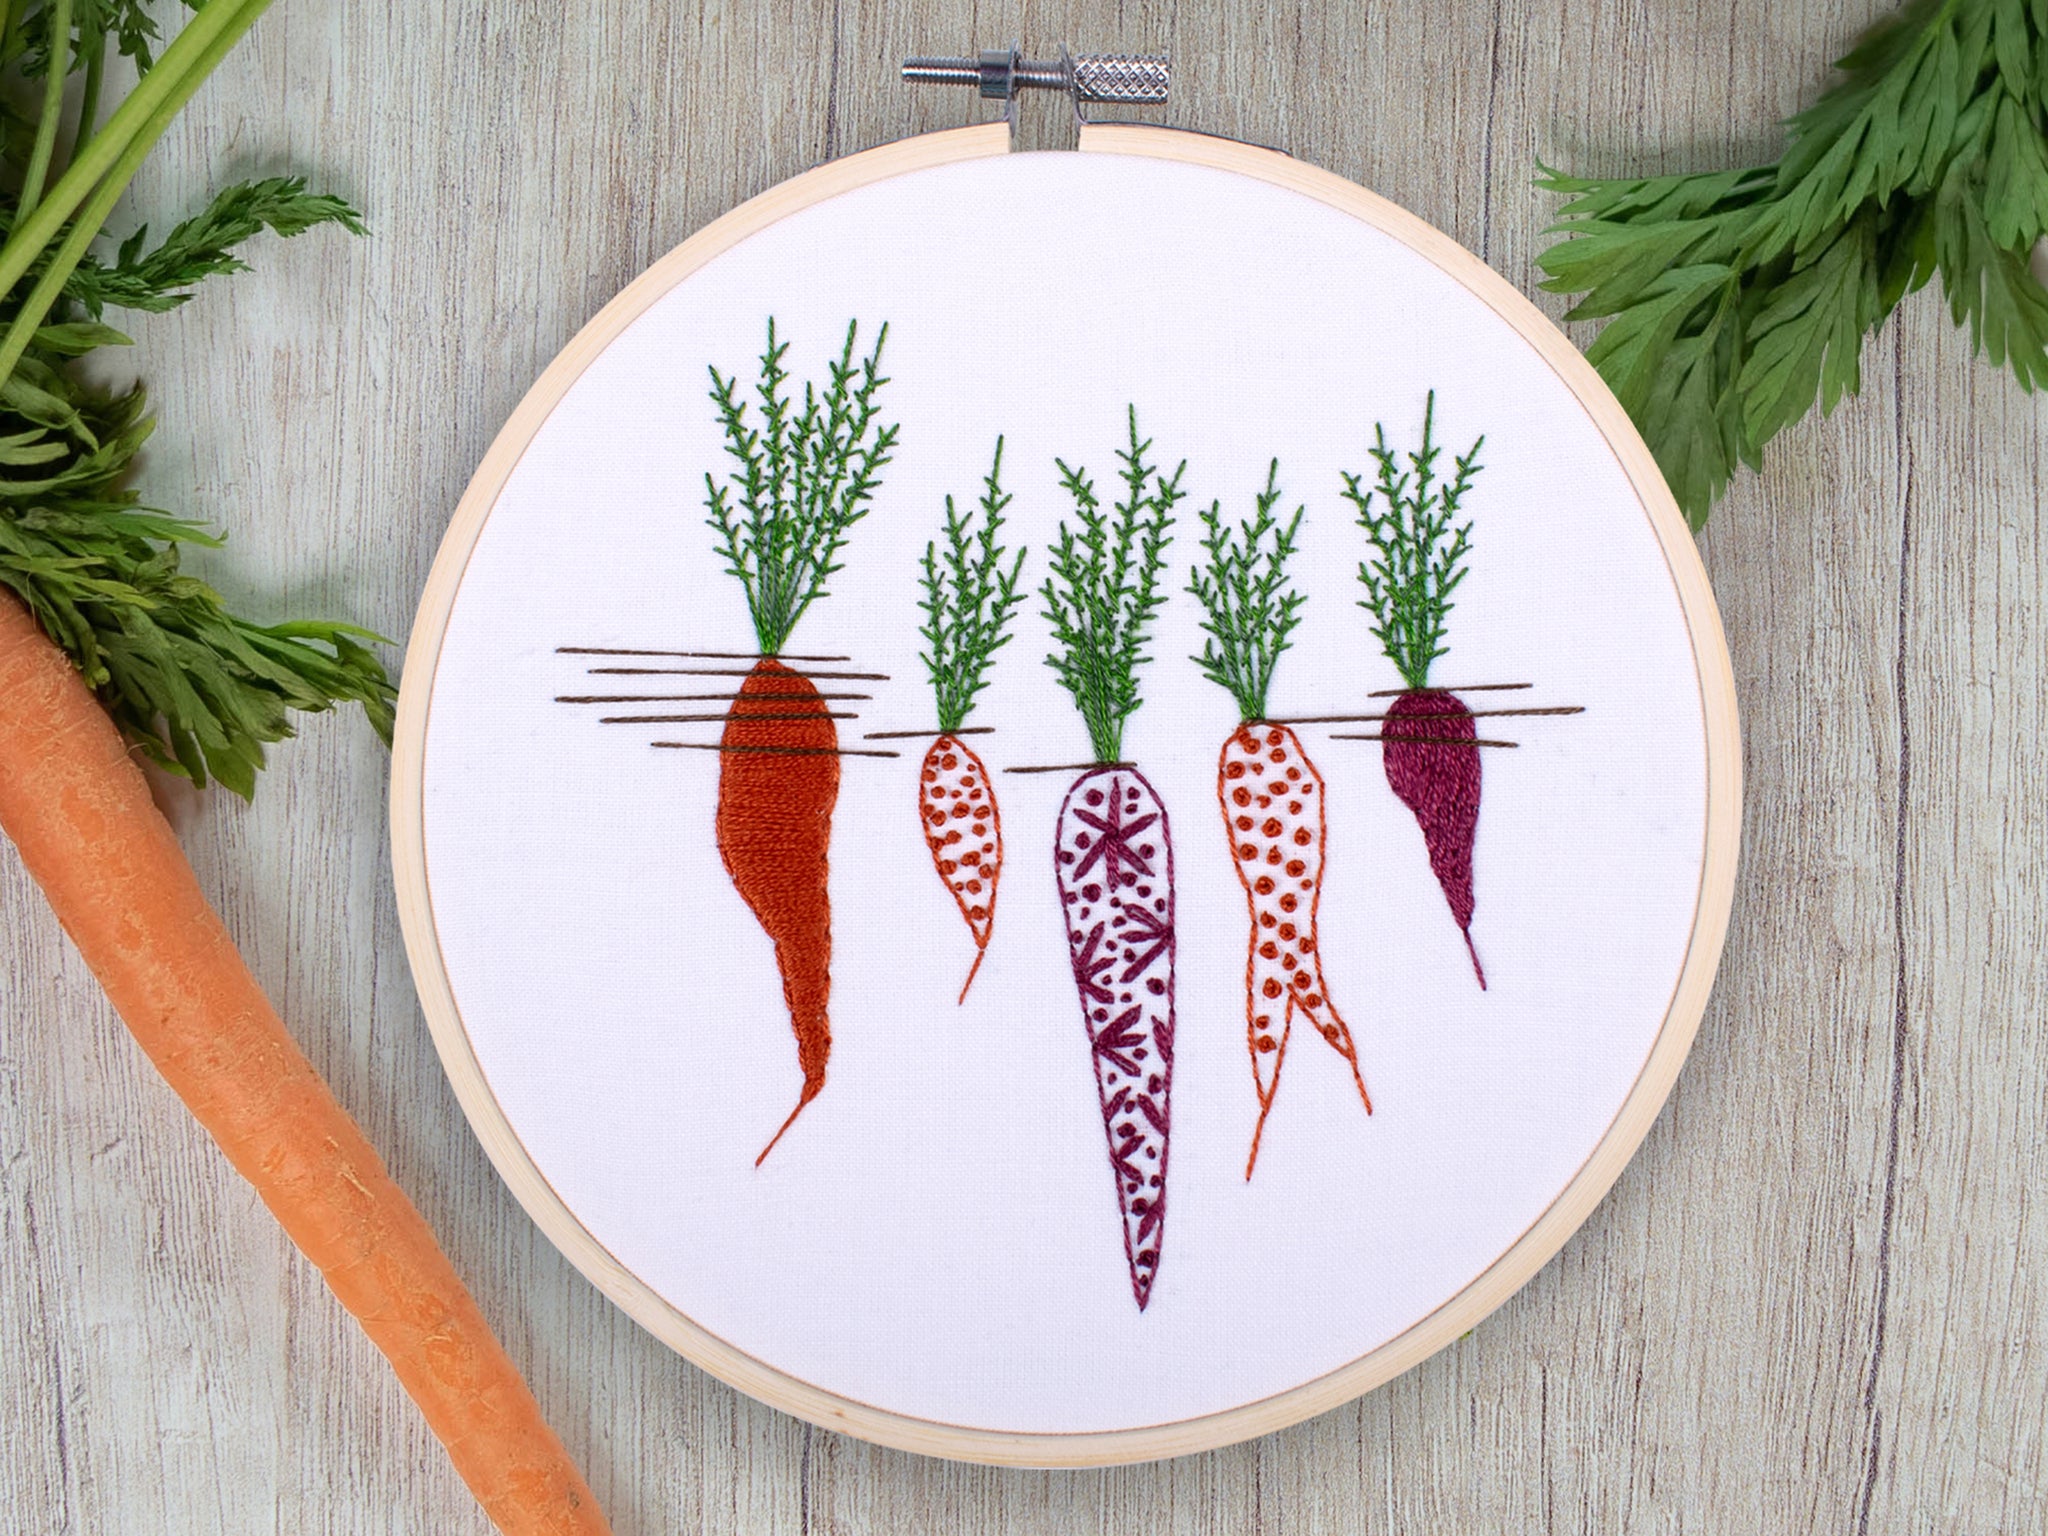 Embroidery Workshop with Heidy of Girl and the Hoop || Sunday, July 9